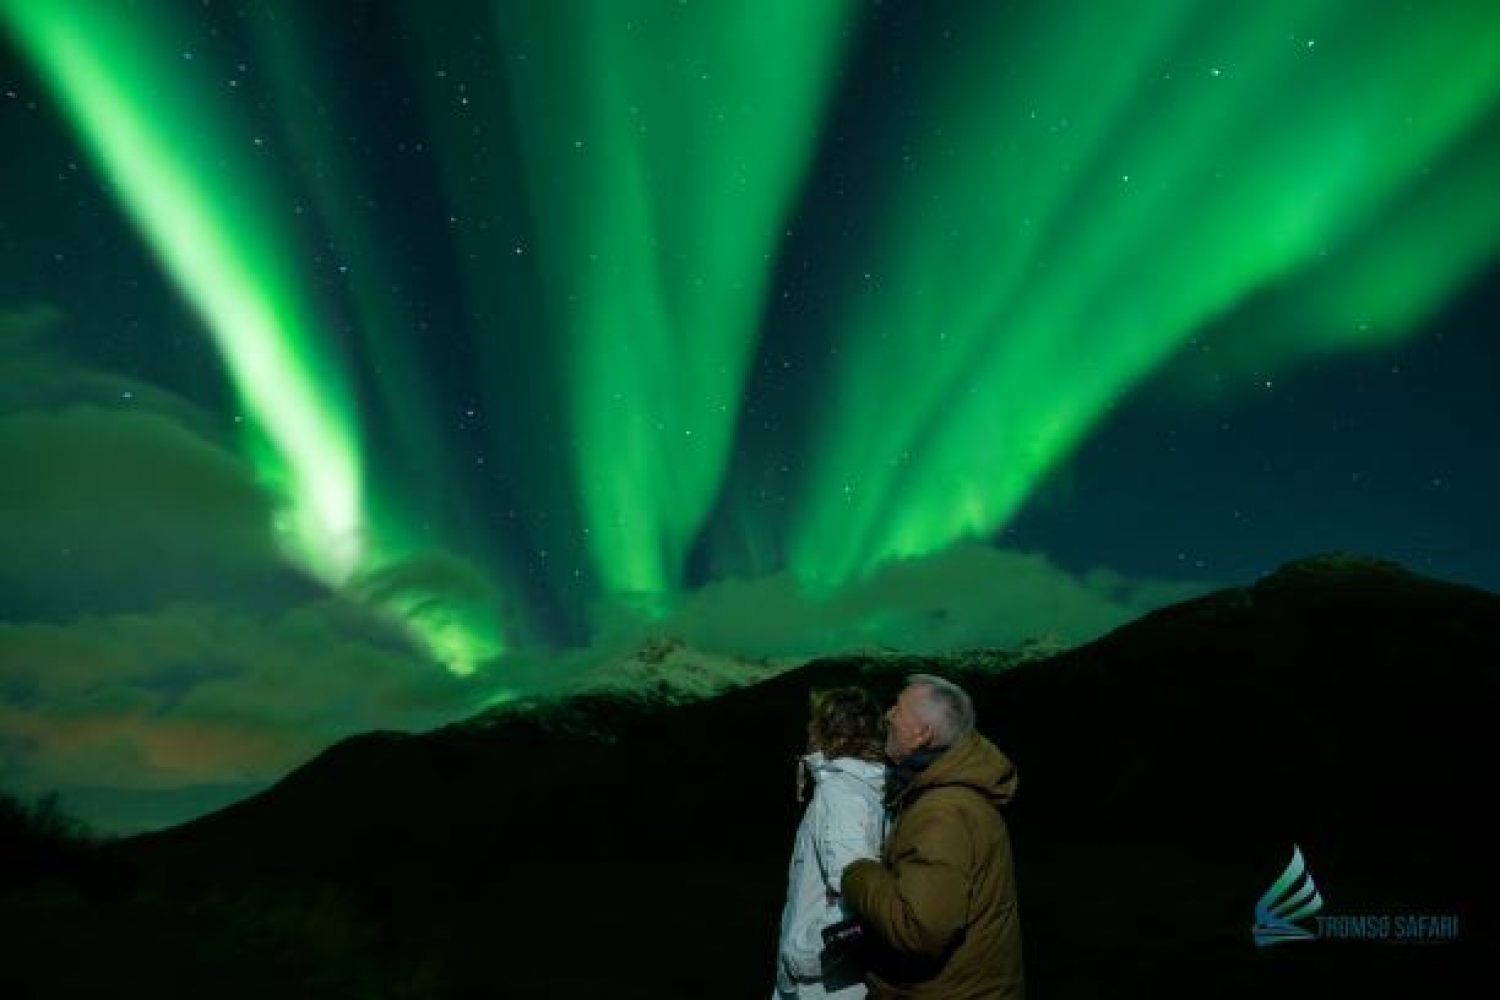 two people admiring the northern lights in the sky